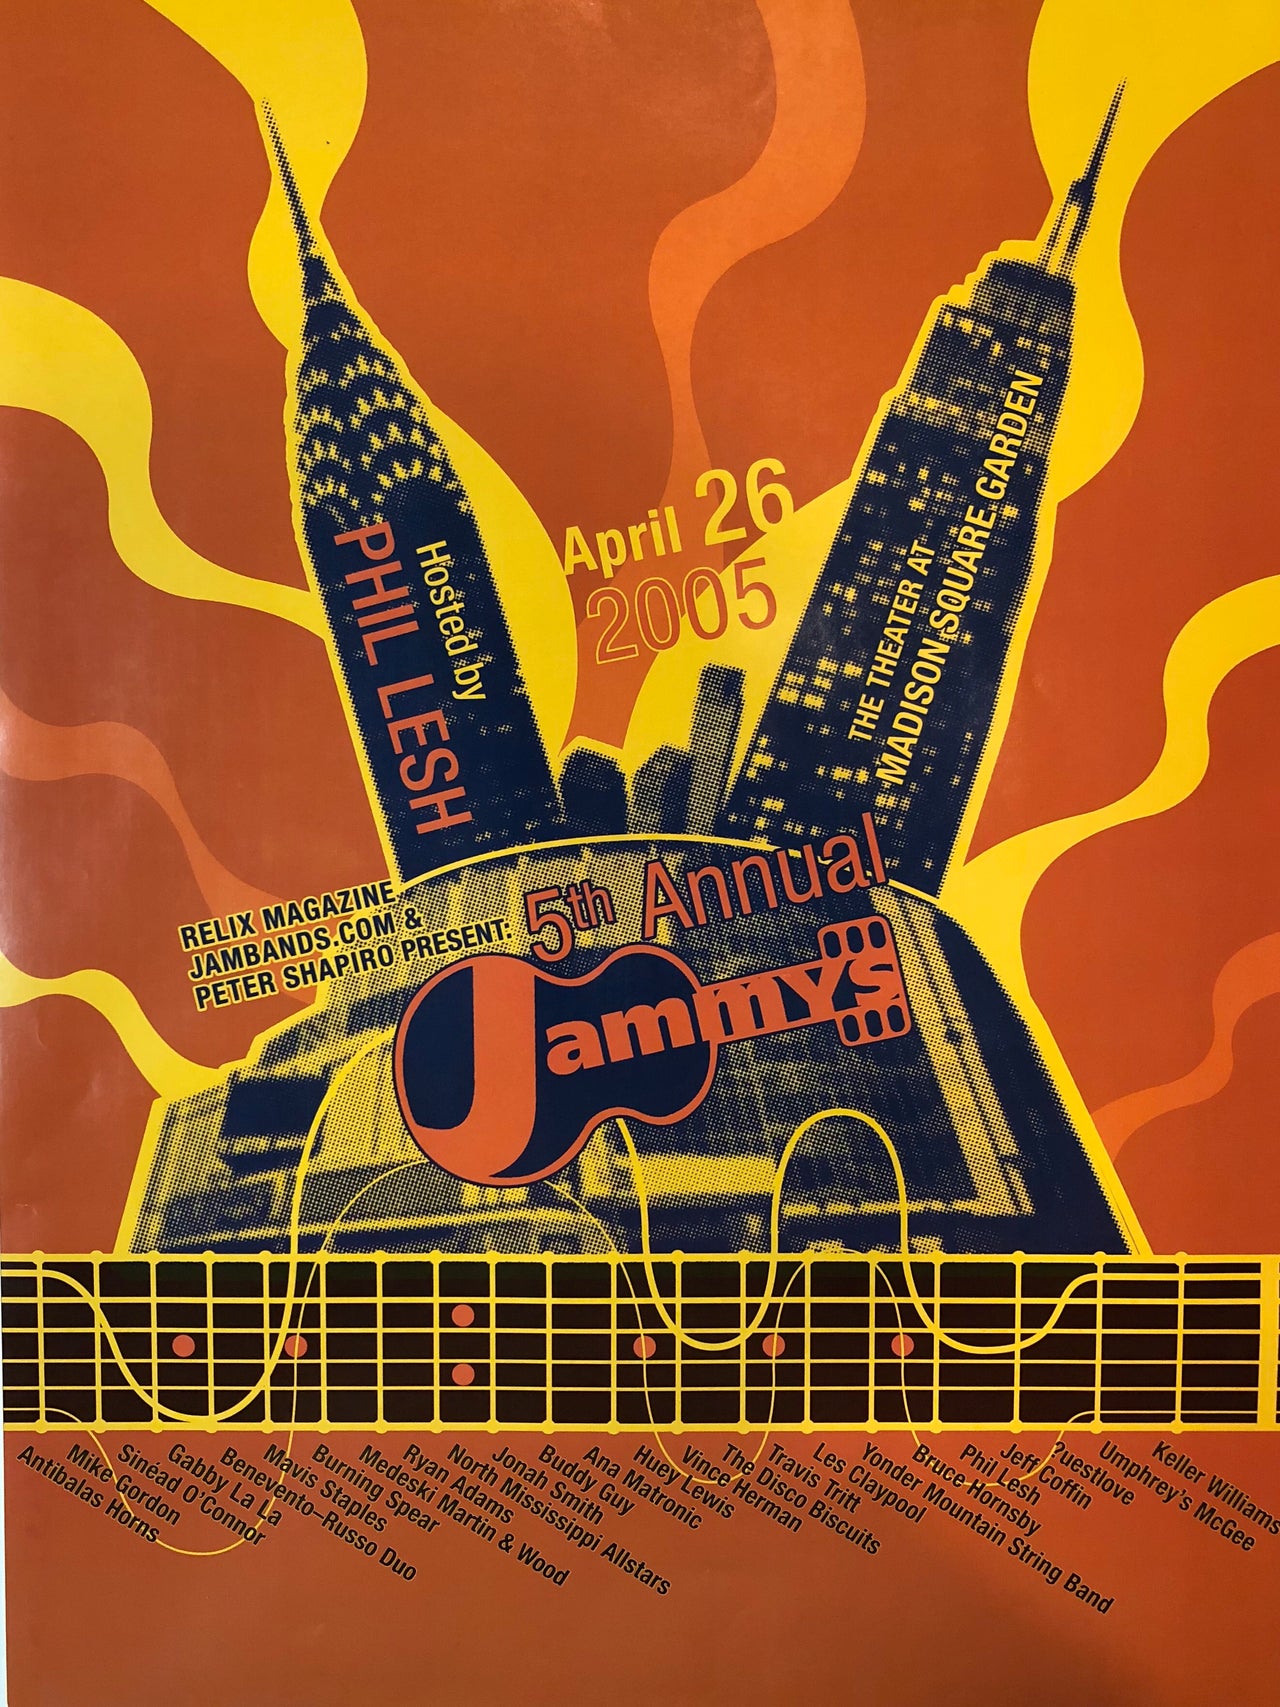 Vintage 5th Annual Jammys Poster (2005) - 18" x 24"